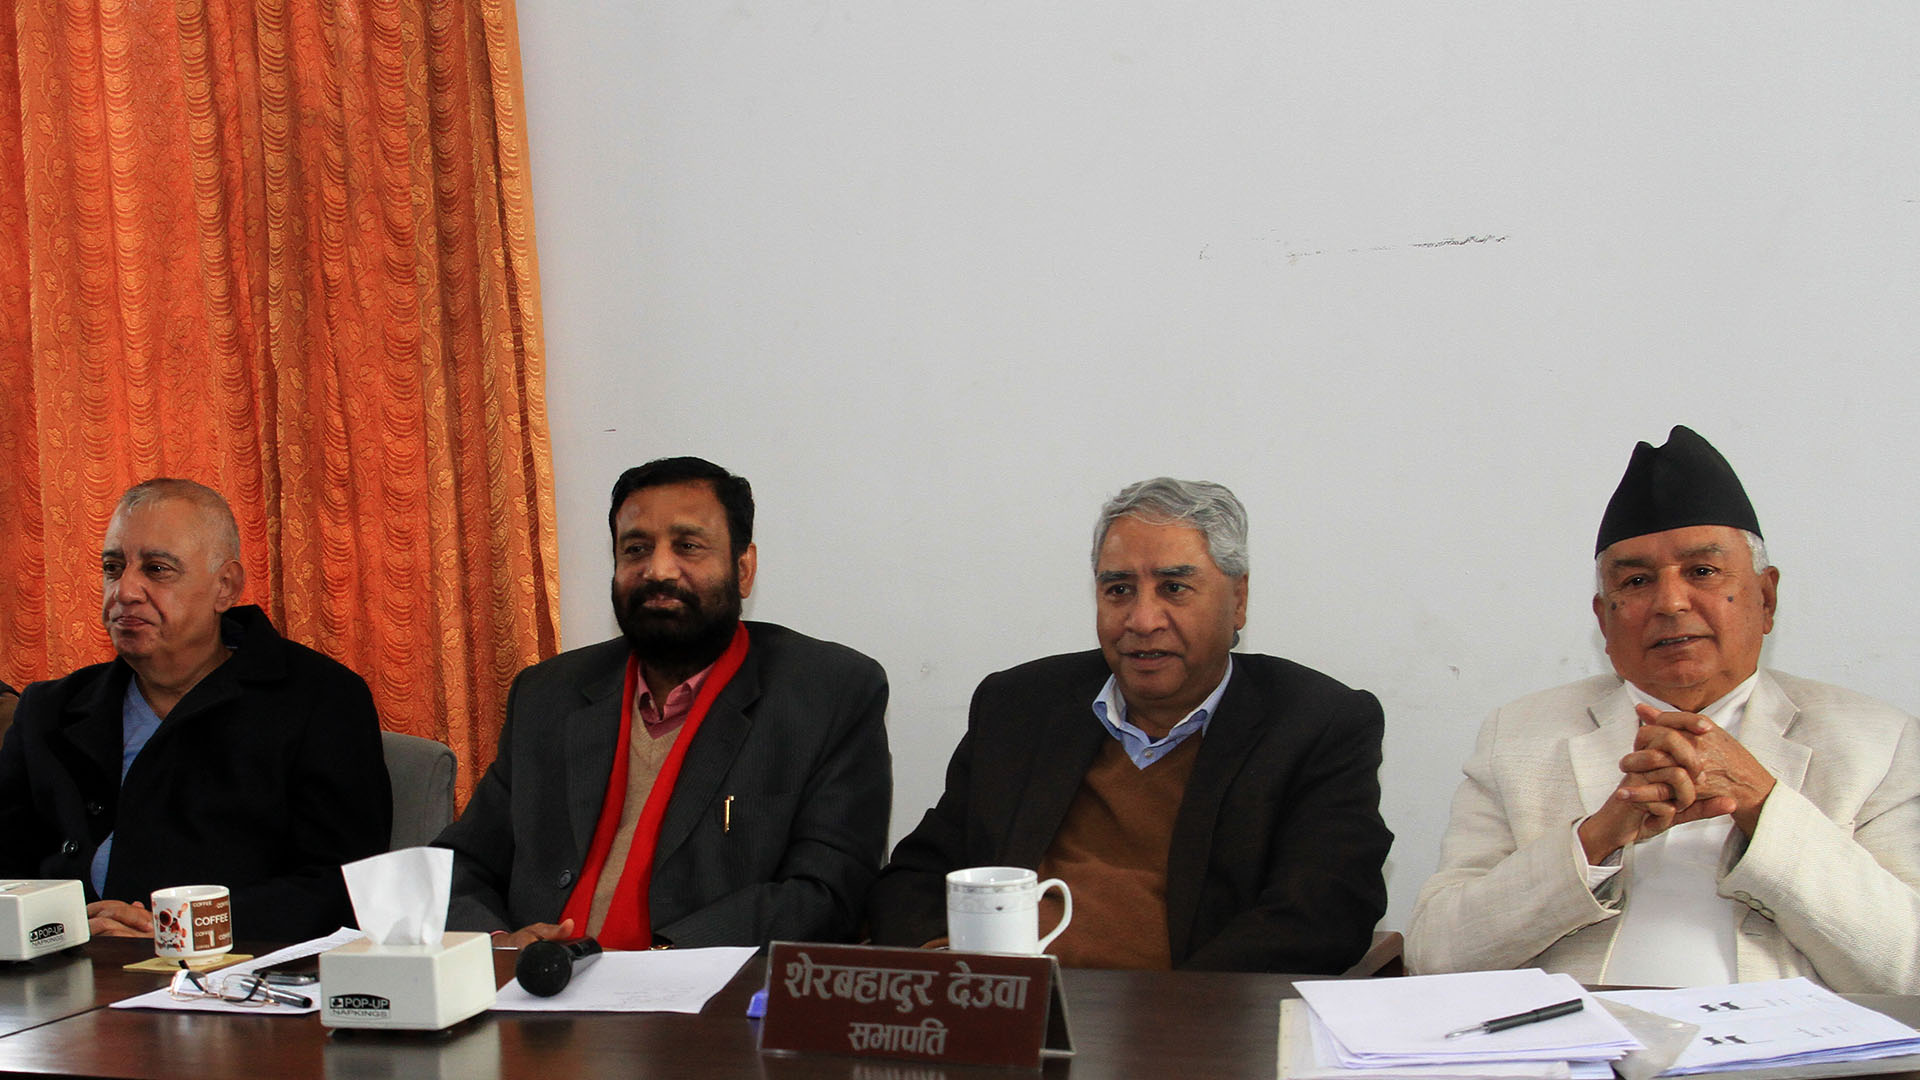 The Nepali Congress concluded that the policies and programs brought by the government should be amended